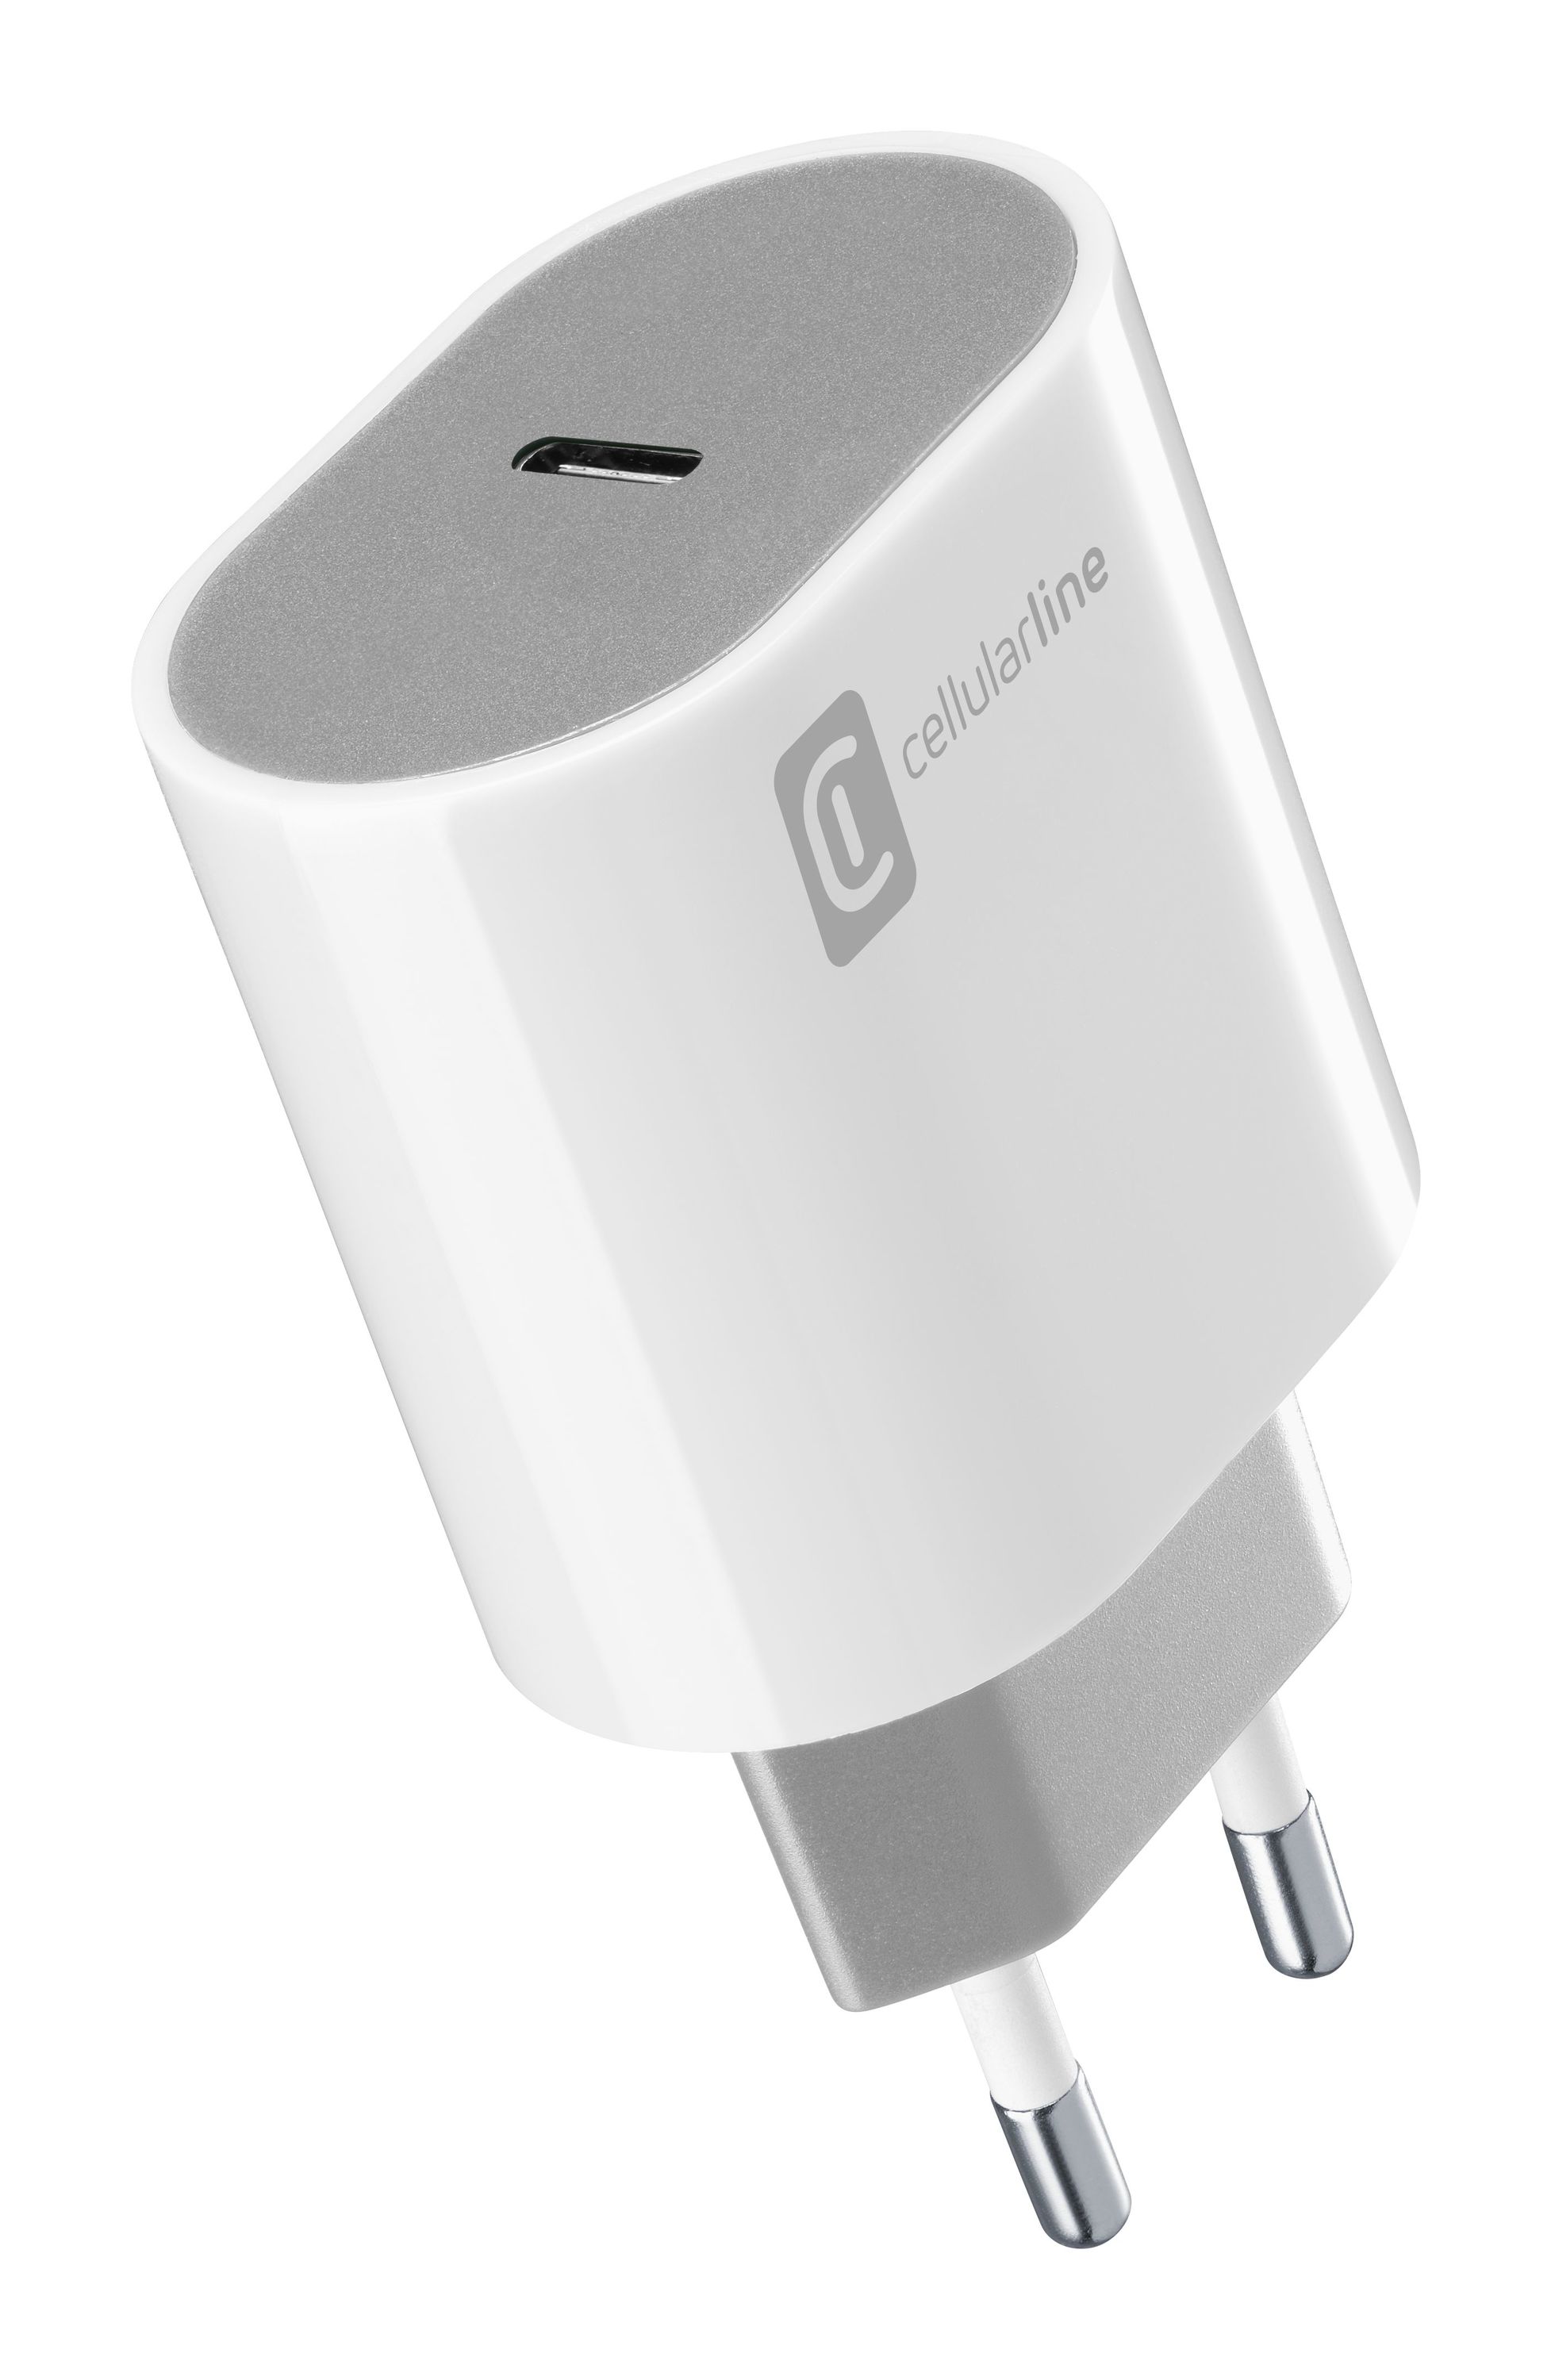 Chargeur USB C VISIODIRECT Chargeur 20W pour Huawei P30 Pro 6.47 |  Boulanger